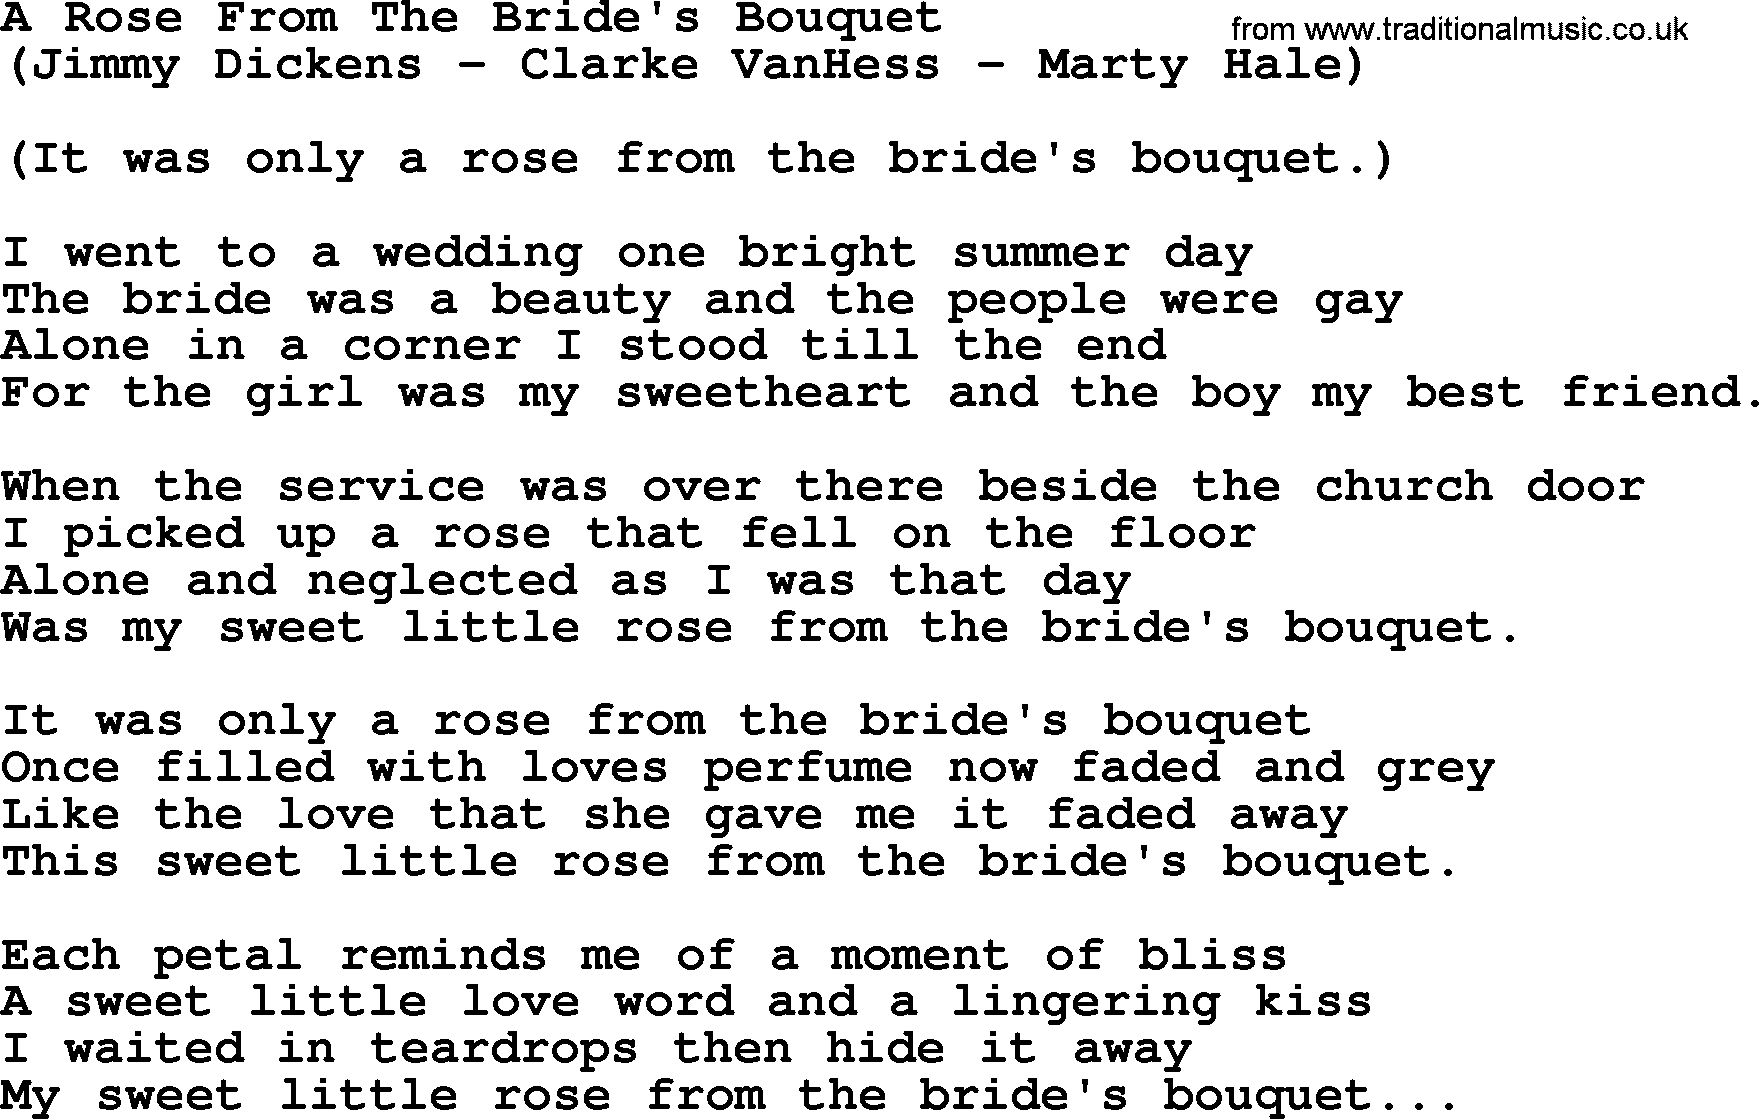 George Jones song: A Rose From The Bride's Bouquet, lyrics